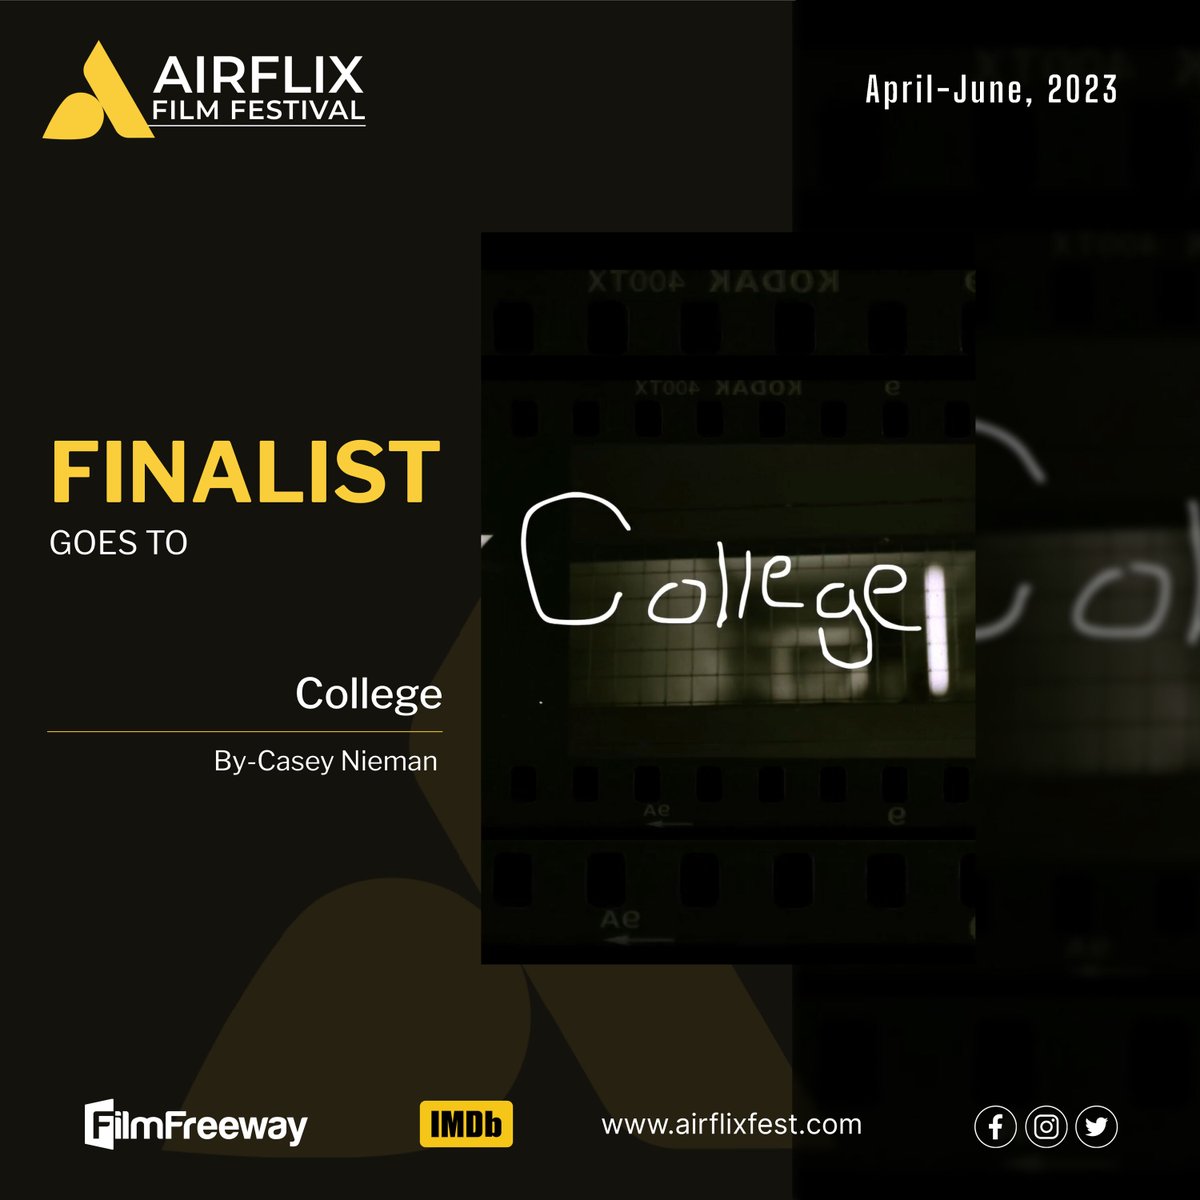 I wish you great fortunes in each and every future endeavor you pursue. Proudly announce 'College' has been selected as a Finalist at Airflix Film Festival. Join now filmfreeway.com/AirflixFilmFes…